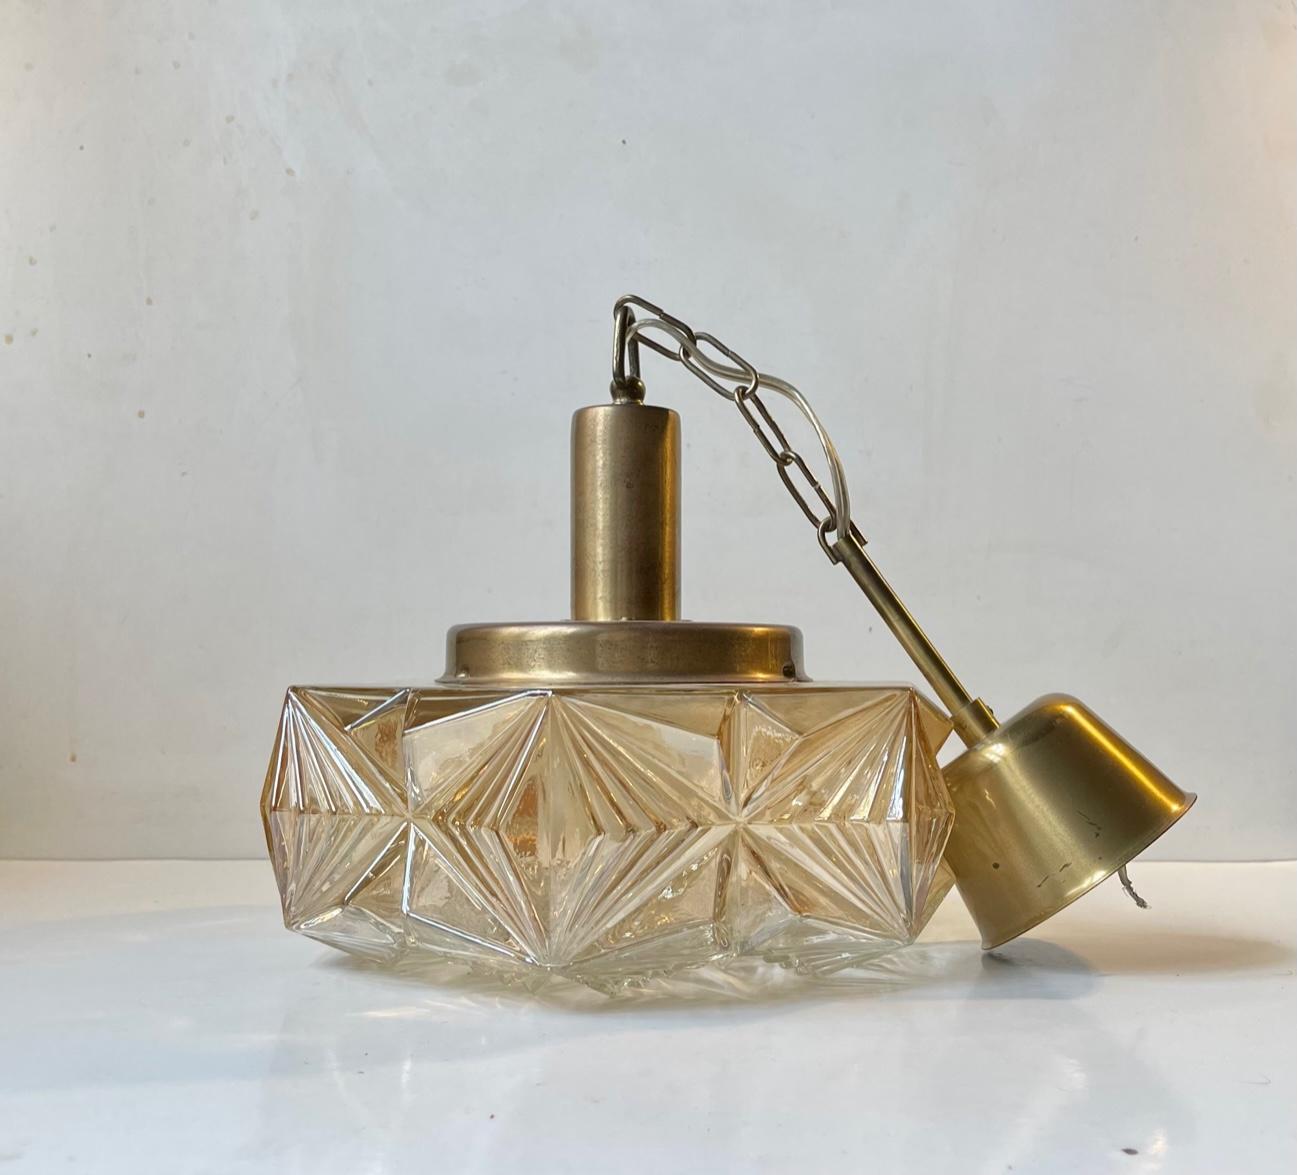 Pendant light designed and manufactured by Danish design trio Vitrika during the 1960s. The name Vitrika, or Vi-Tri-Ka means 'The three of us can do it'. The lamp features a geometric outer amber colored glass shade and a top, chain and original